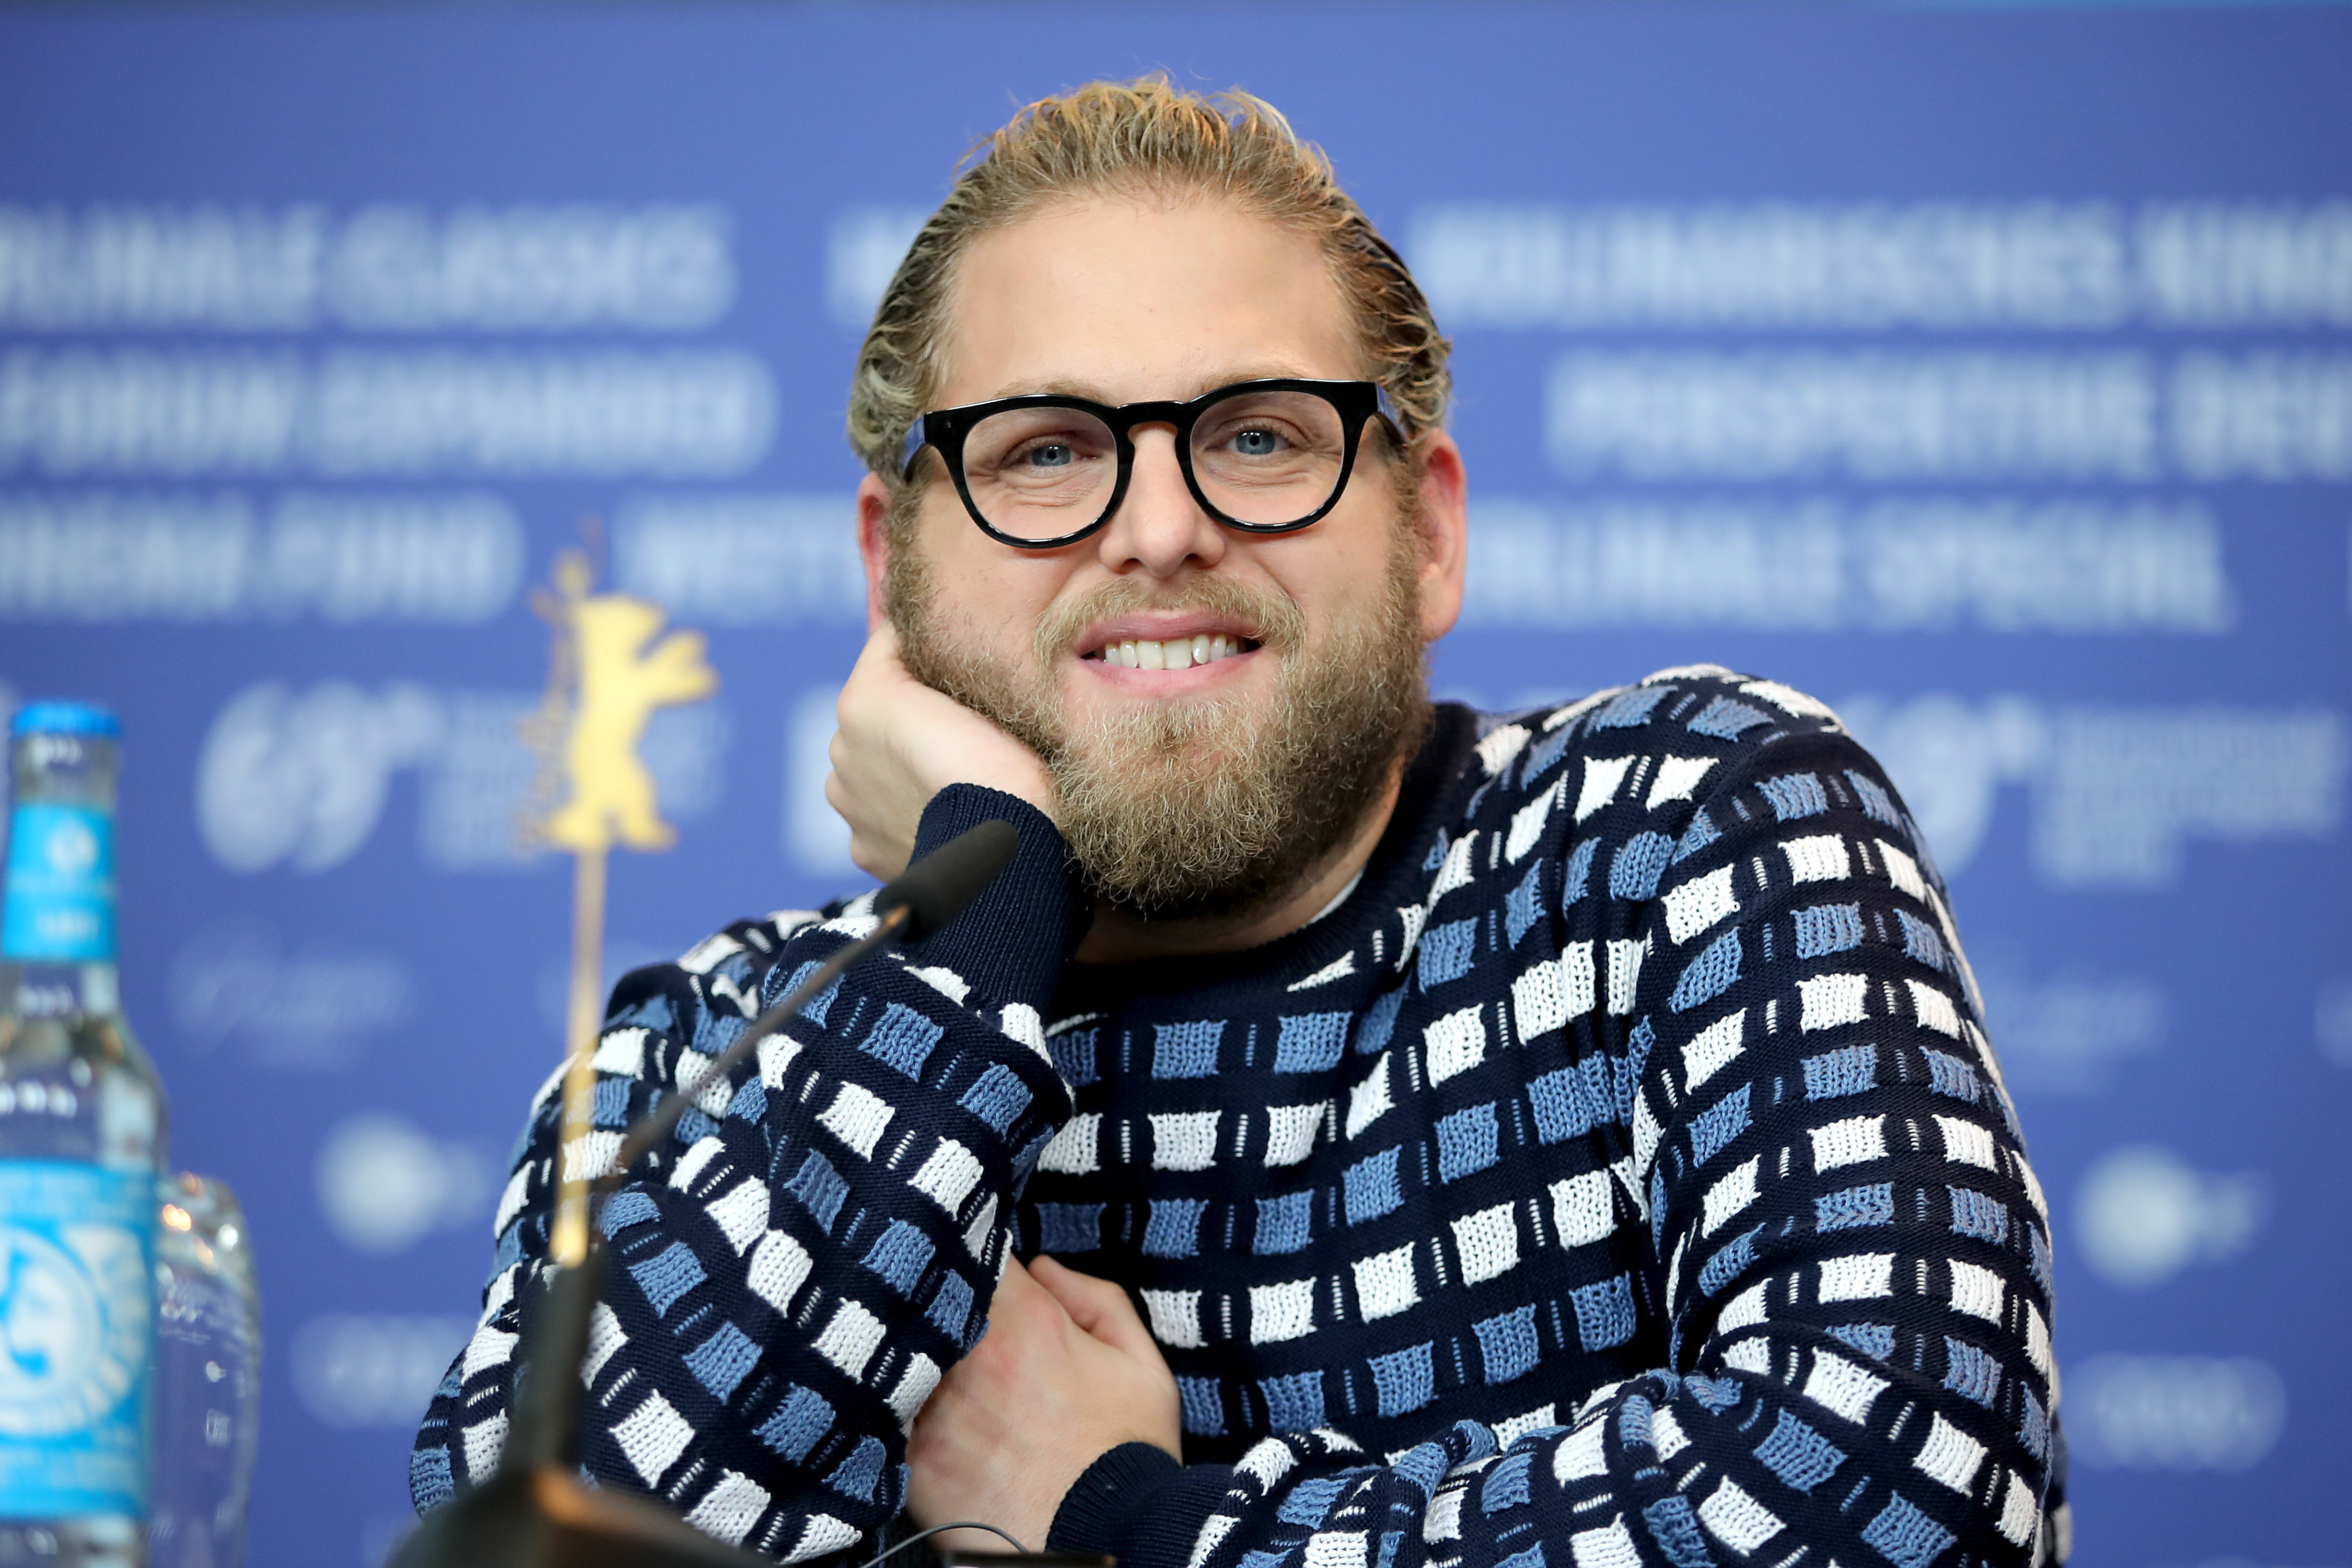 Actor Jonah Hill wearing glasses and a sweater during a press conference for his movie "Mid90s"